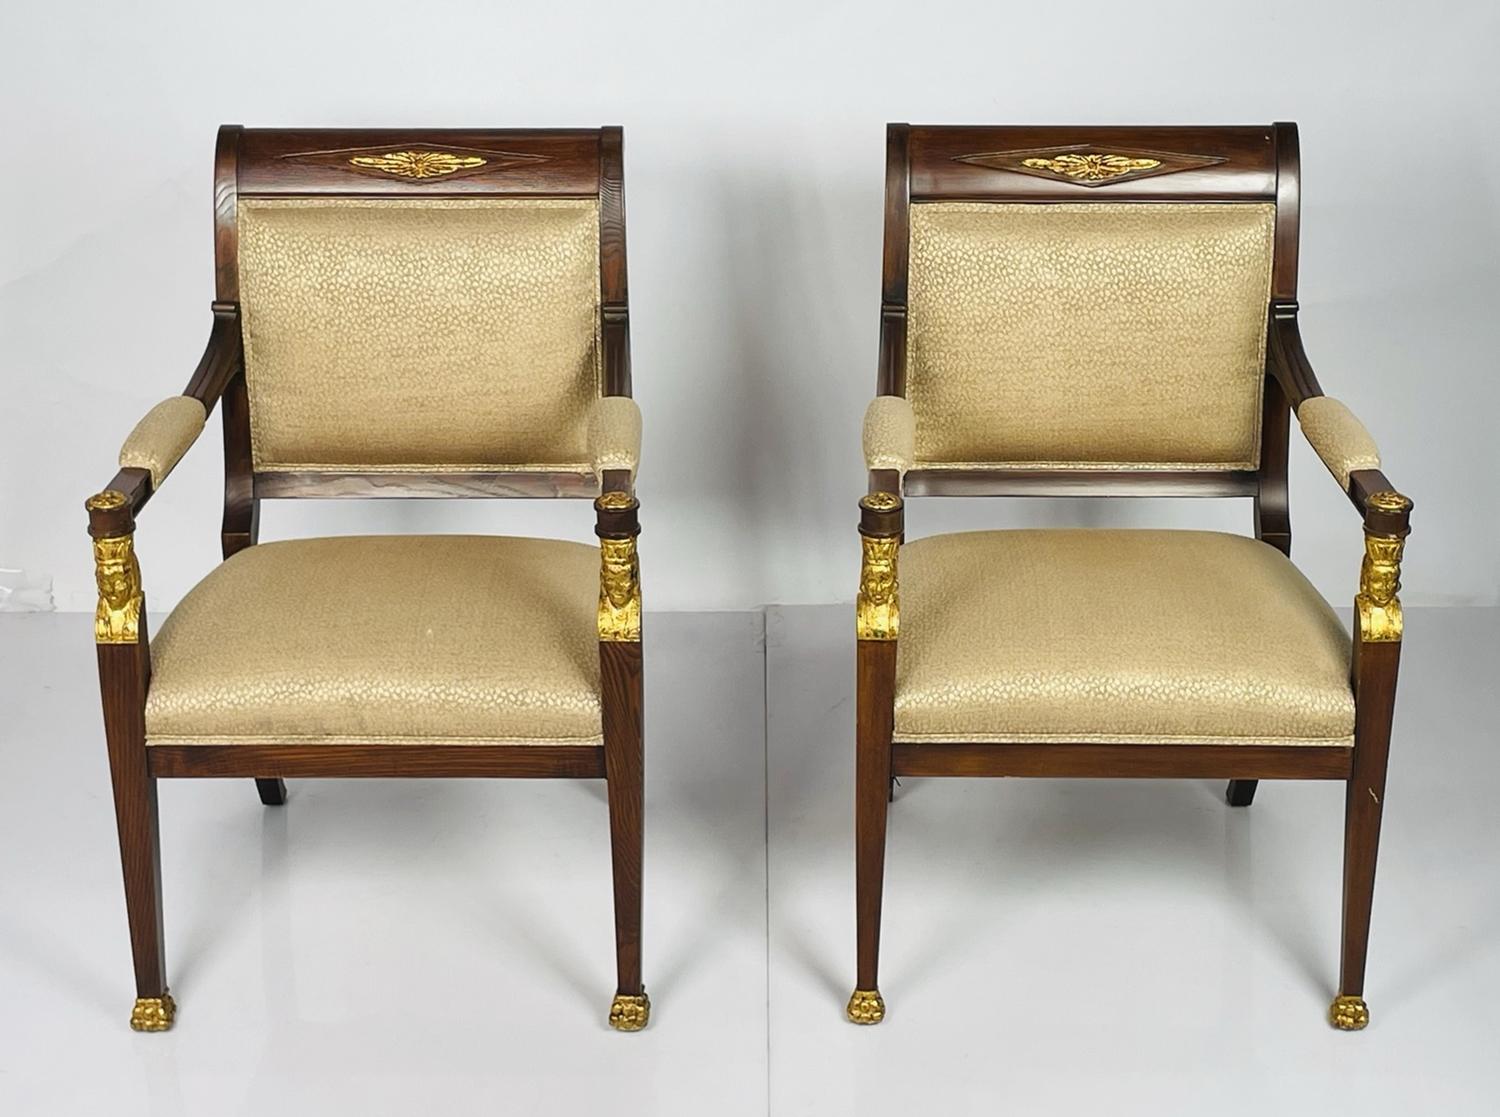 Introducing our exquisite French Empire style Mahogany Armchairs Giltwood, a timeless addition to any luxurious living space. These stunning armchairs embody the opulence and elegance of the French Empire era, beautifully crafted with the finest